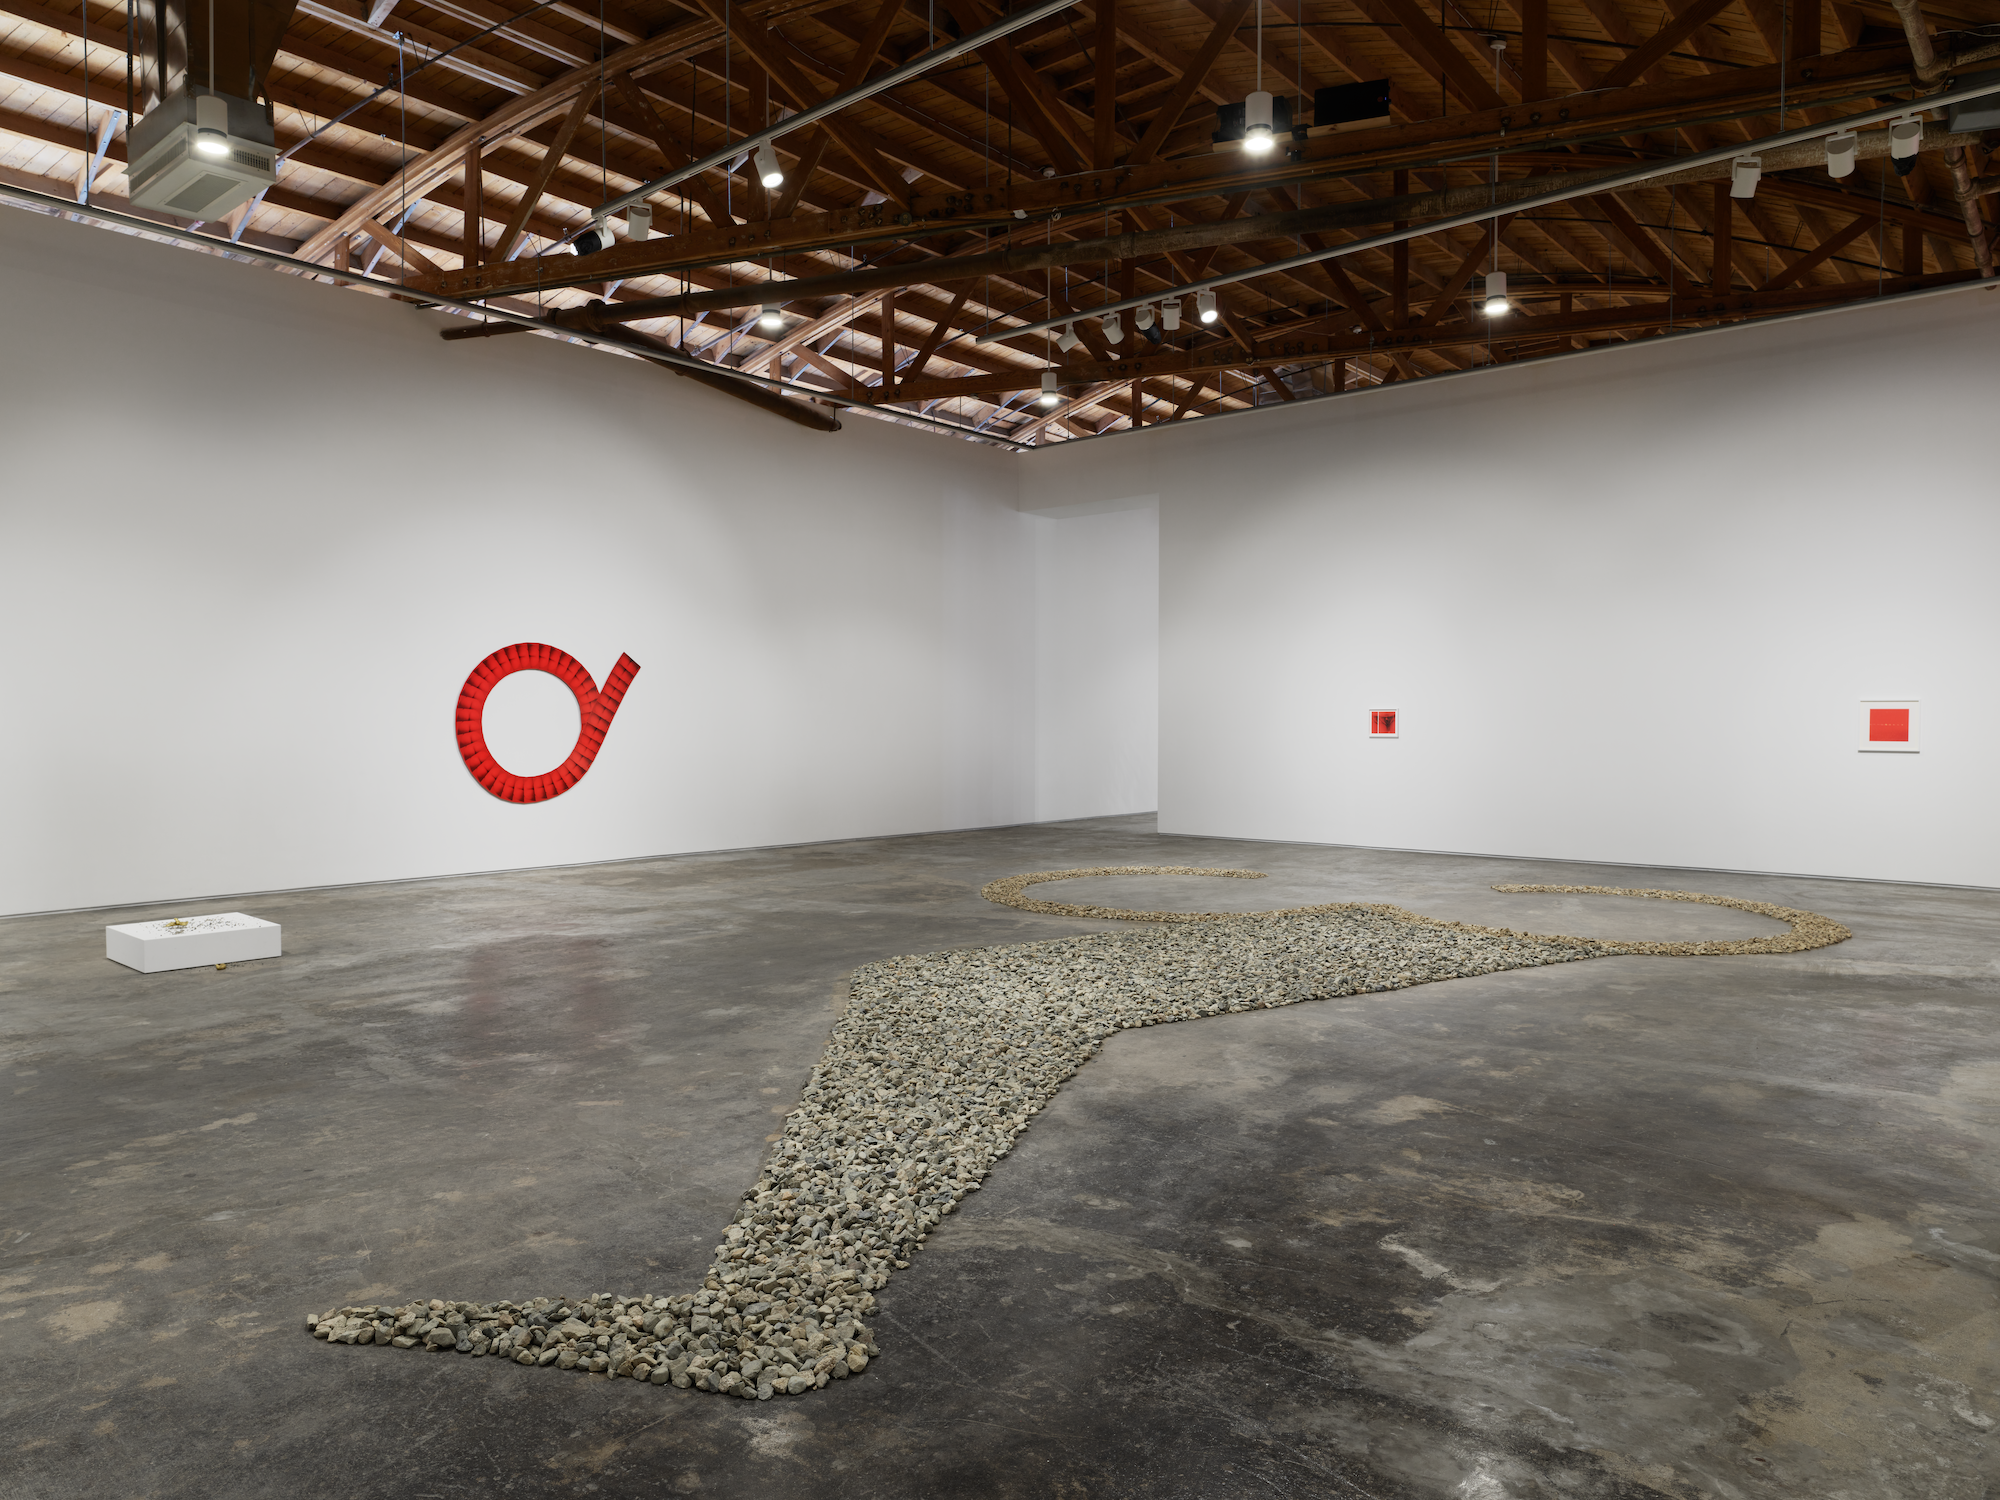 In a large gallery space, hundreds of stones form the shape of a leg on the ground, in the background red prints hang.